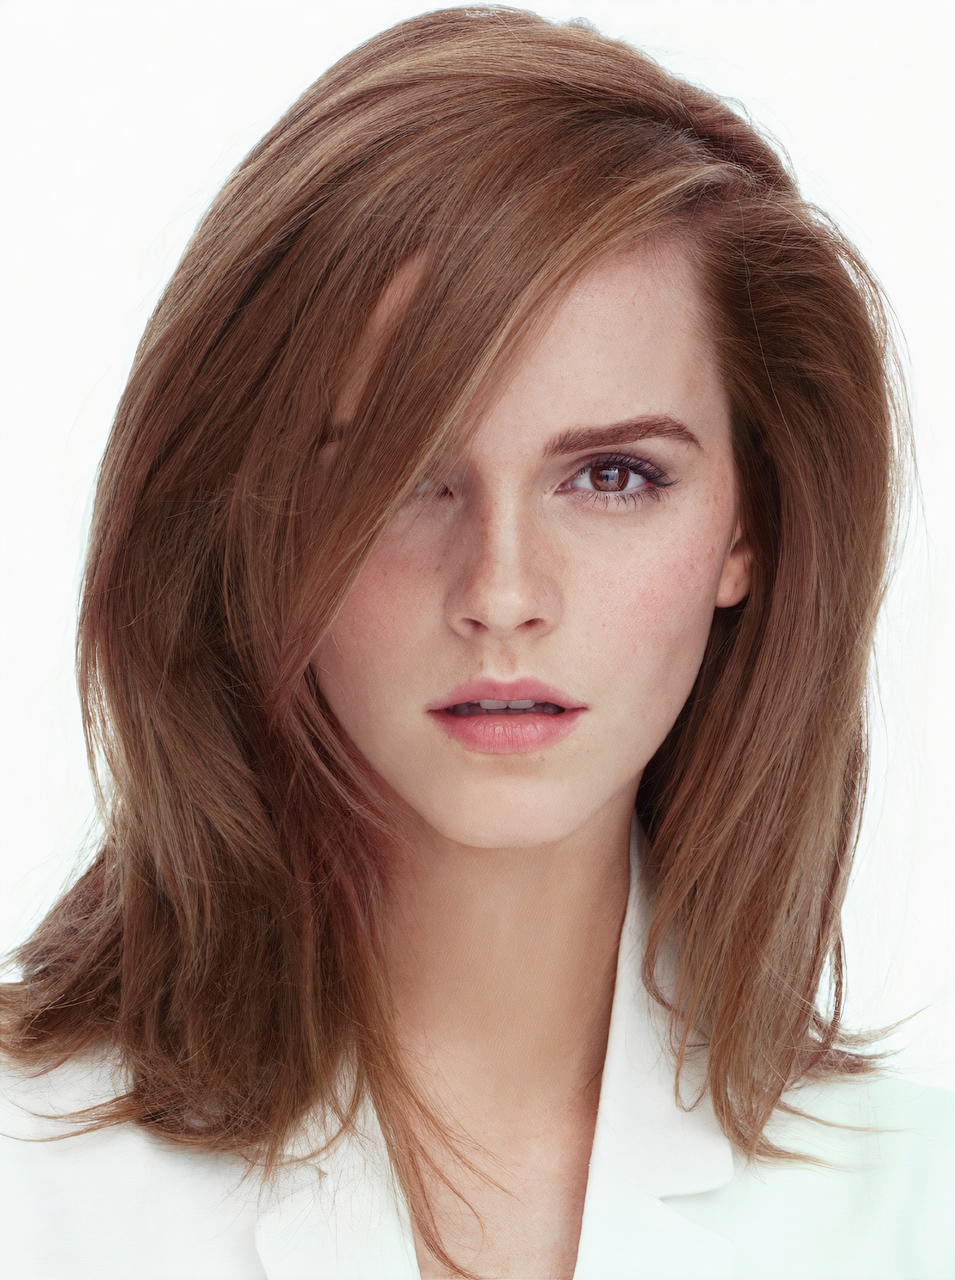 Emma Watson Women Actress British Brunette Young Woman Face Simple Background Long Hair Hair Coverin 955x1280